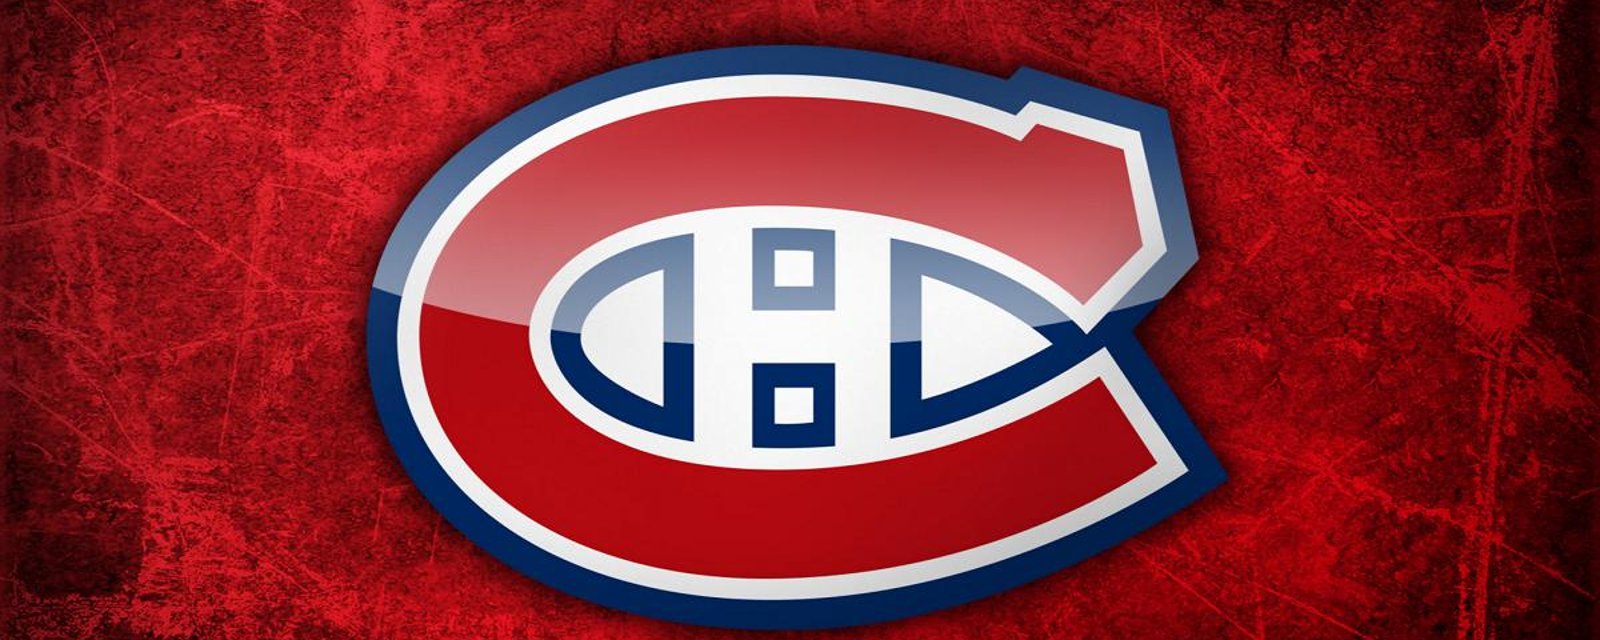 Update on three injured Habs players, some good ,some bad.